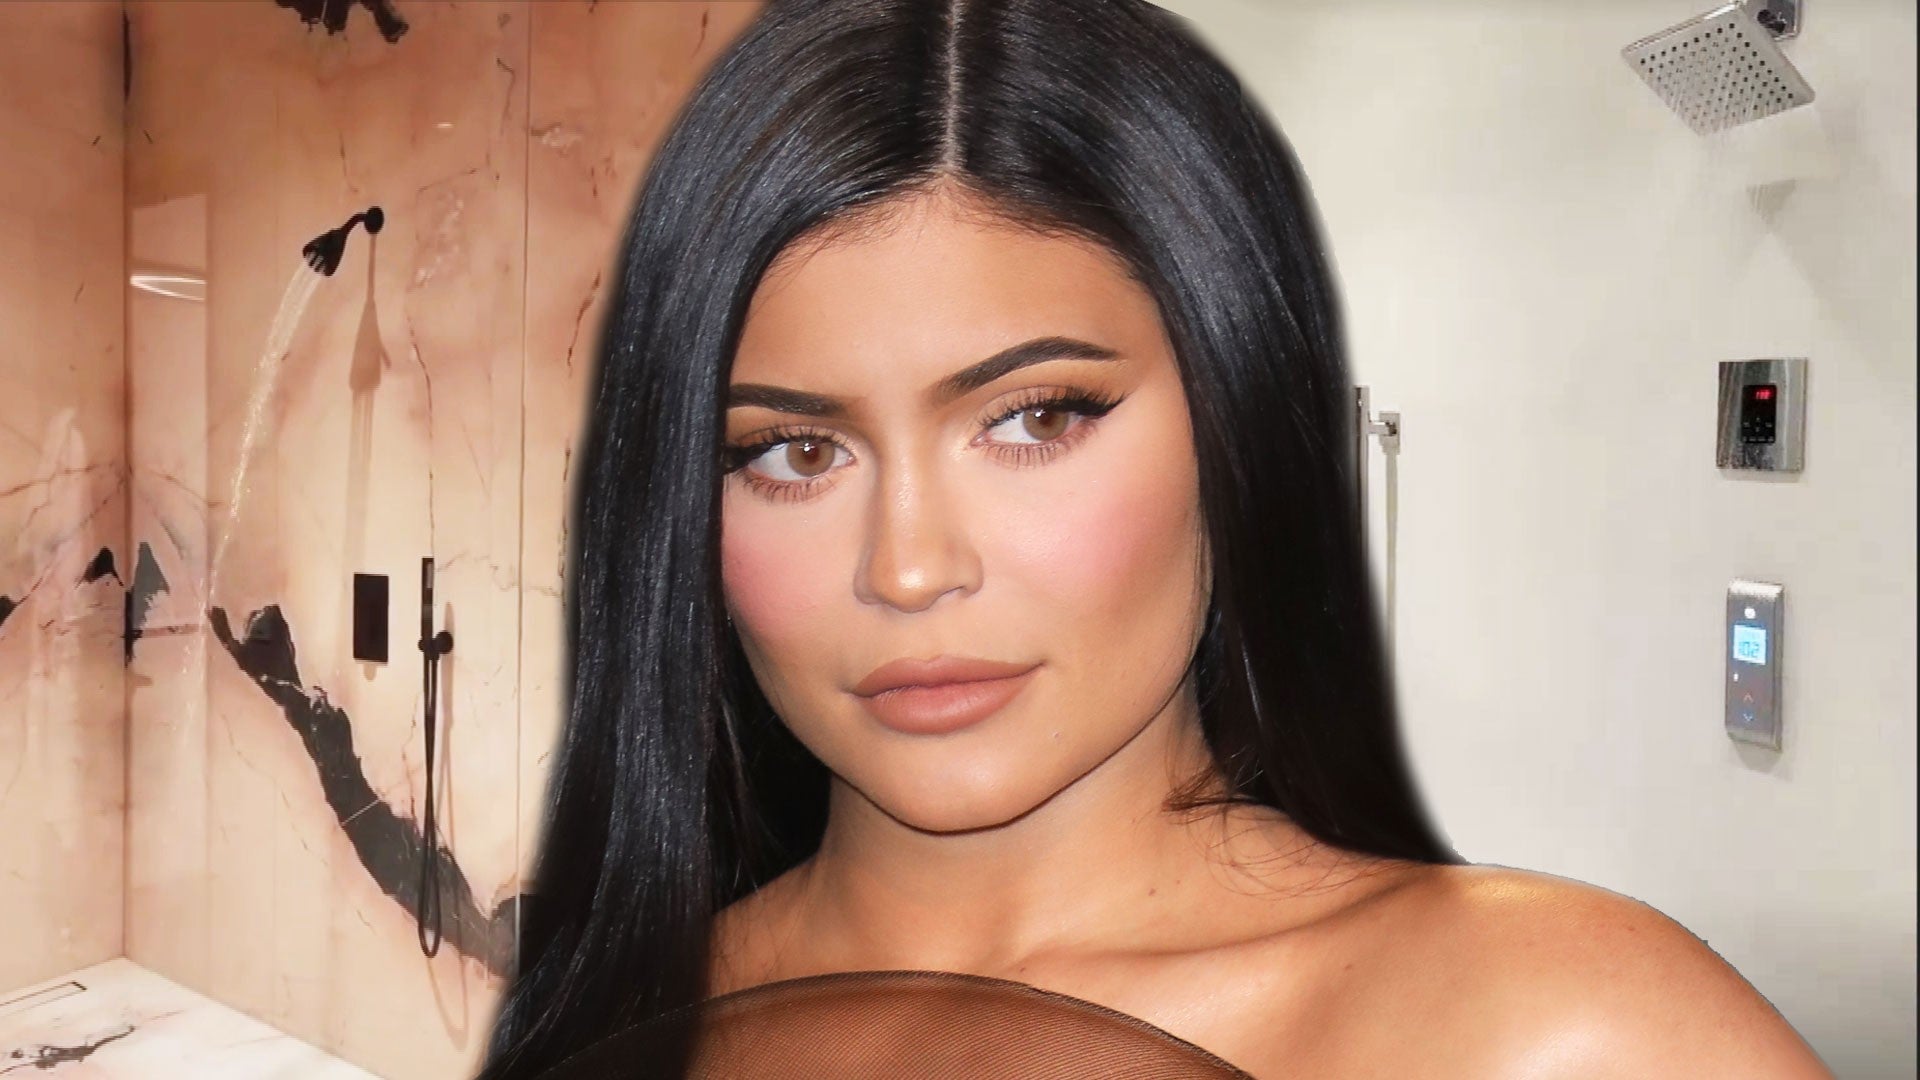 Kylie Jenner Responds To Fans Commenting On Her Shower By Sharing A Video Of Her High Tech One Entertainment Tonight